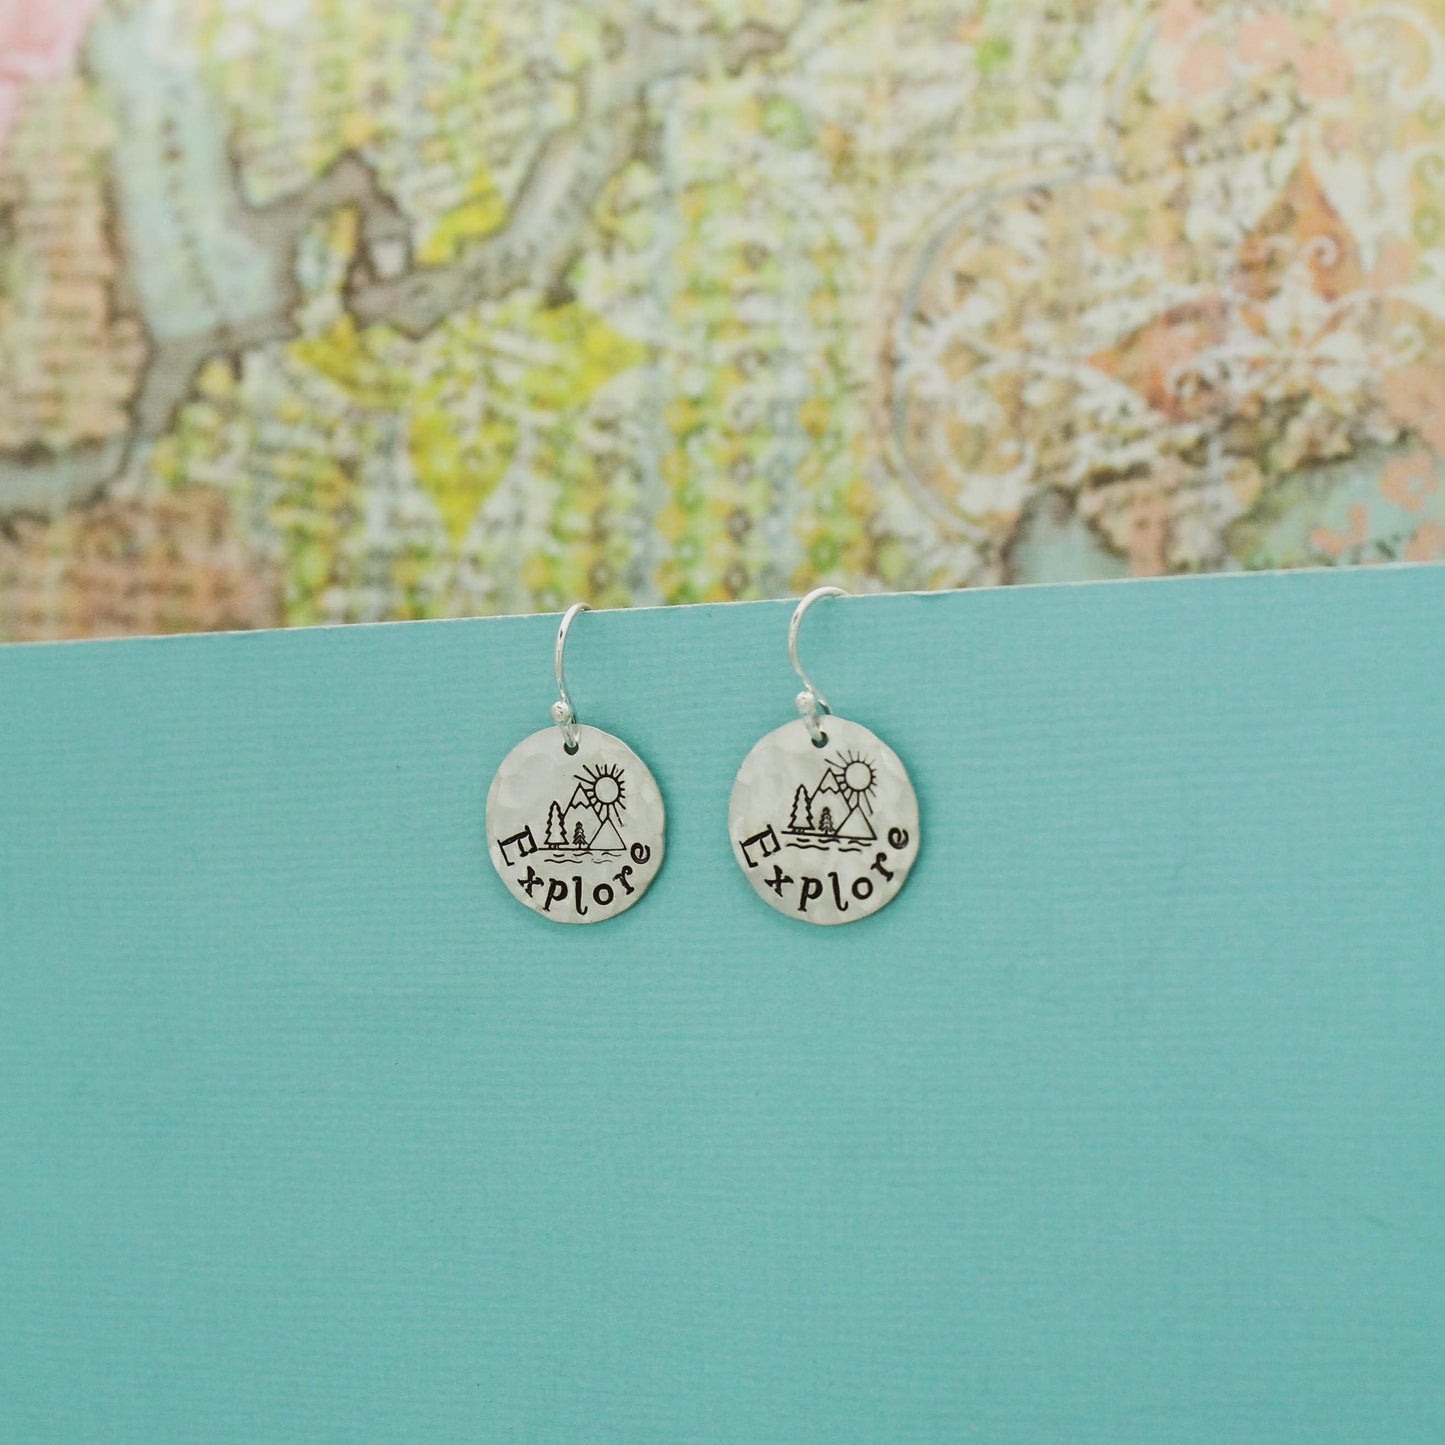 Explore Sterling Silver Earrings, Explore Mountains Jewelry, Hand Stamped Personalized Earrings, Camper Explore Jewelry Camping Gift for Her